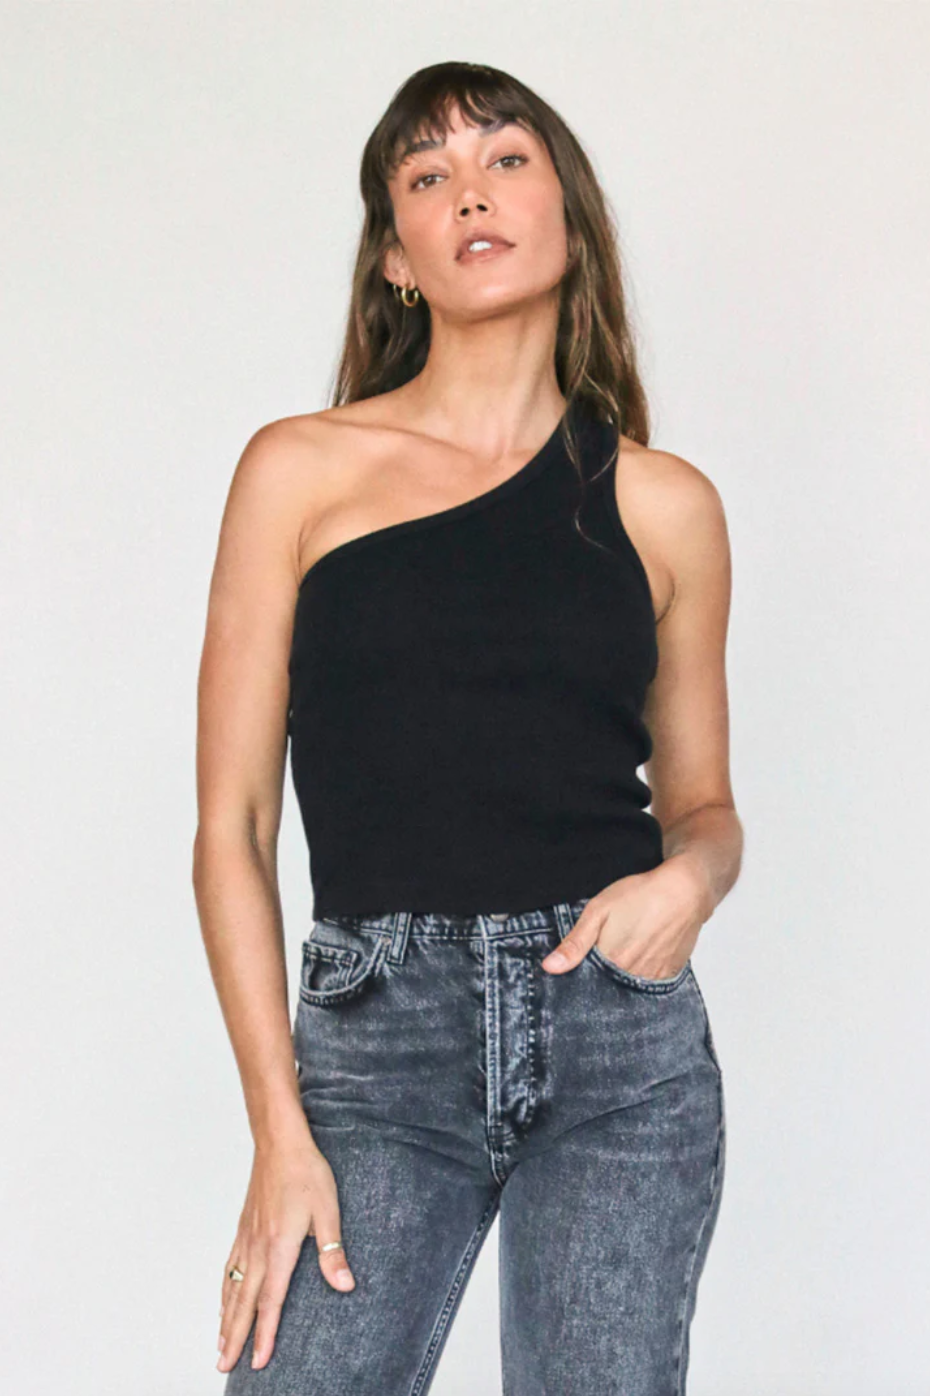 A woman wearing a Perfectwhitetee Call Me One Shoulder Structured Rib Tank and blue jeans stands confidently against a plain white background in her bungalow. Her hand rests on her hip, and she has a relaxed expression with bangs framing her face.